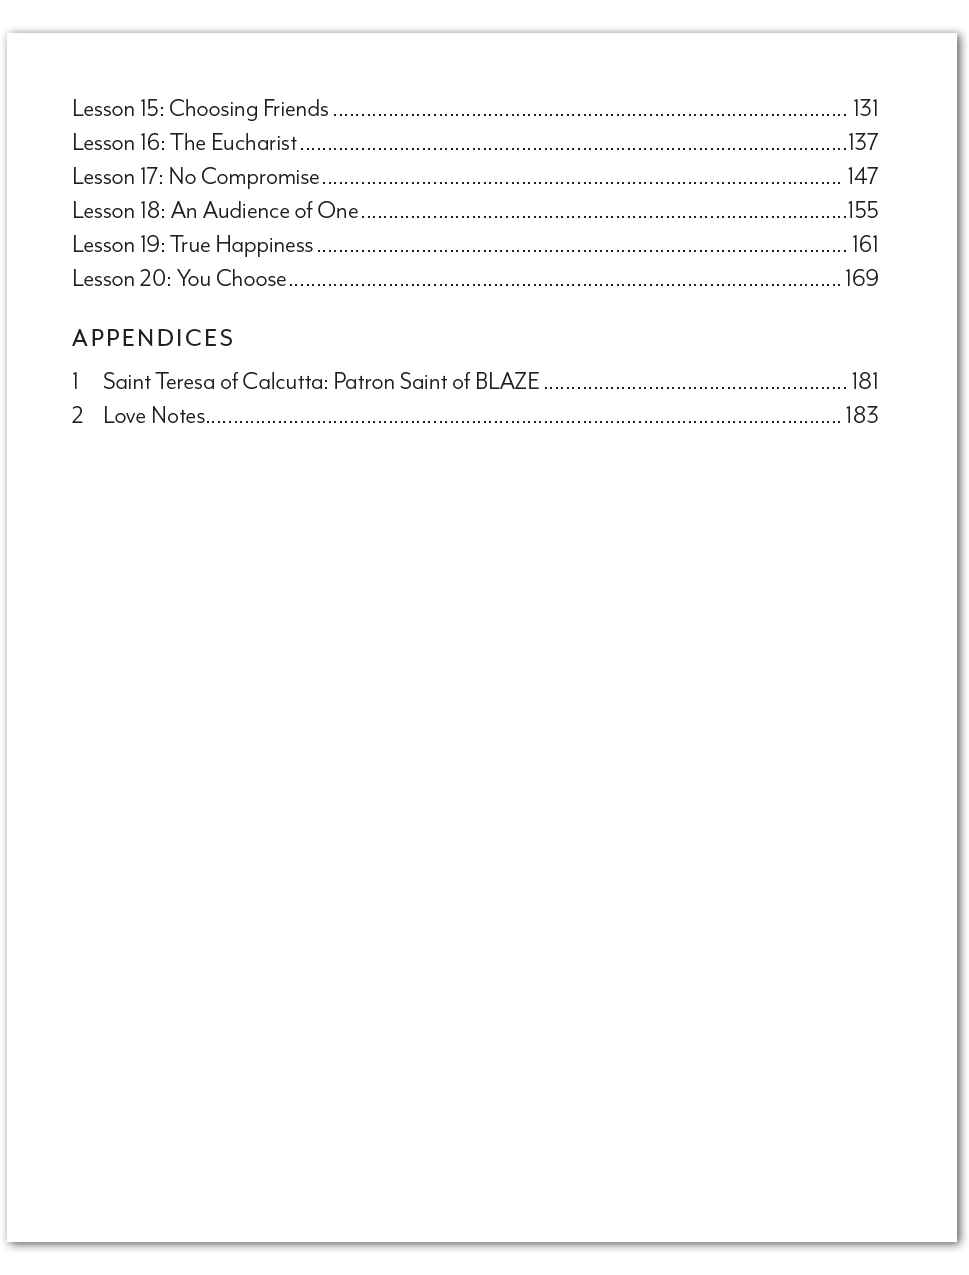 BLAZE Masterpiece leaders guide table of contents page 2